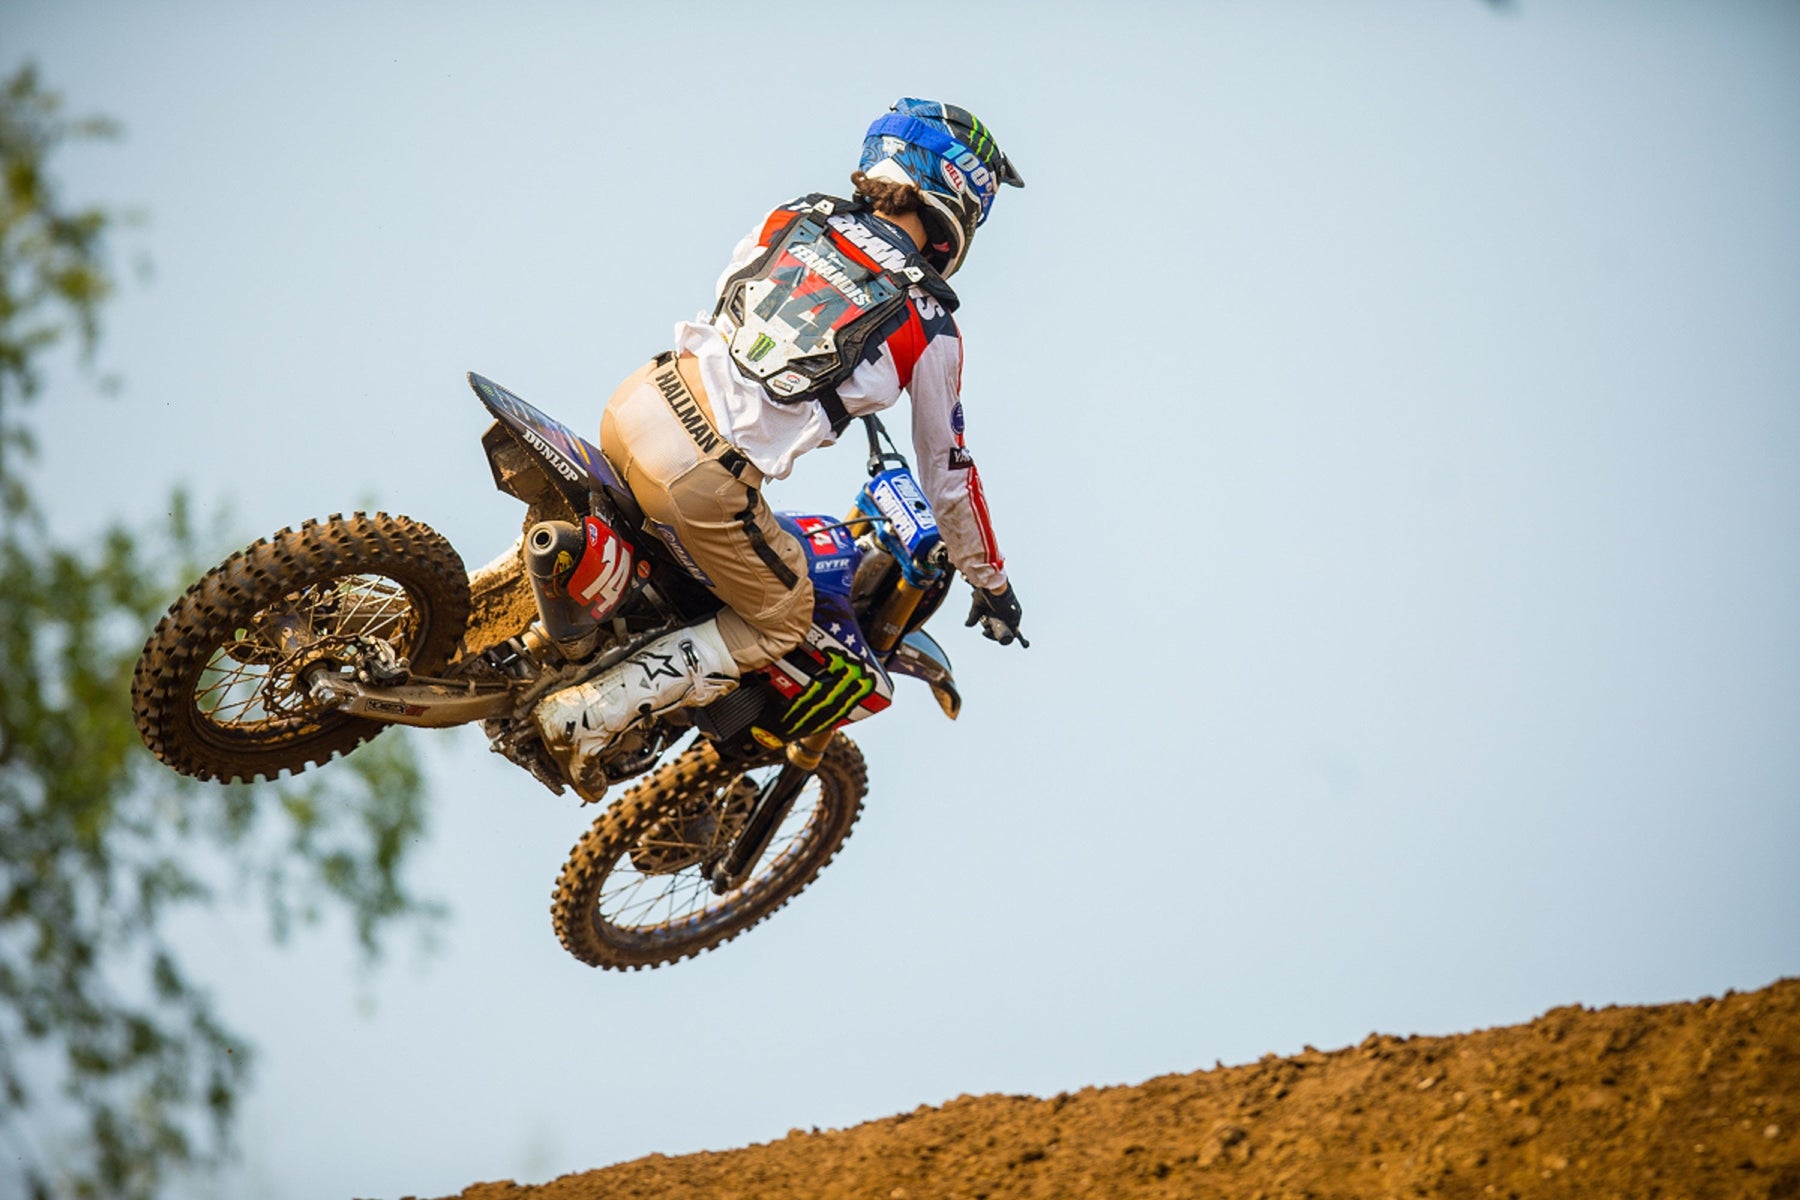 ALPINESTARS PODIUM LOCK-OUT AS DYLAN FERRANDIS IS THE AMA 450MX KING OF REDBUD NATIONAL, MICHIGAN